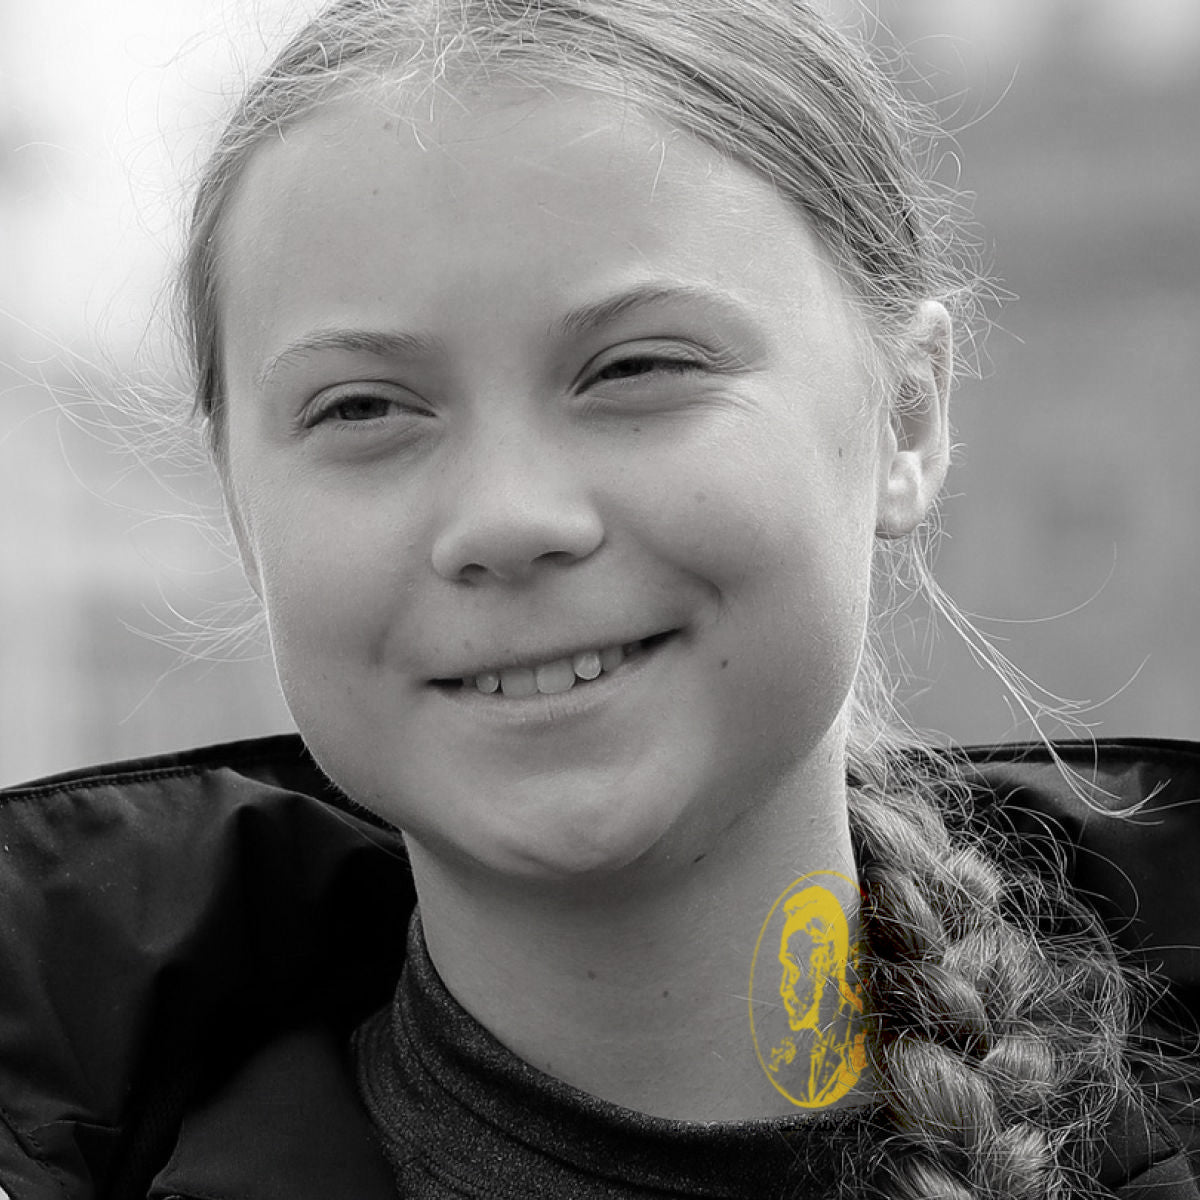 Nobel peace prize tattoo for climate warrior Greta Thunberg That’s the spirit!